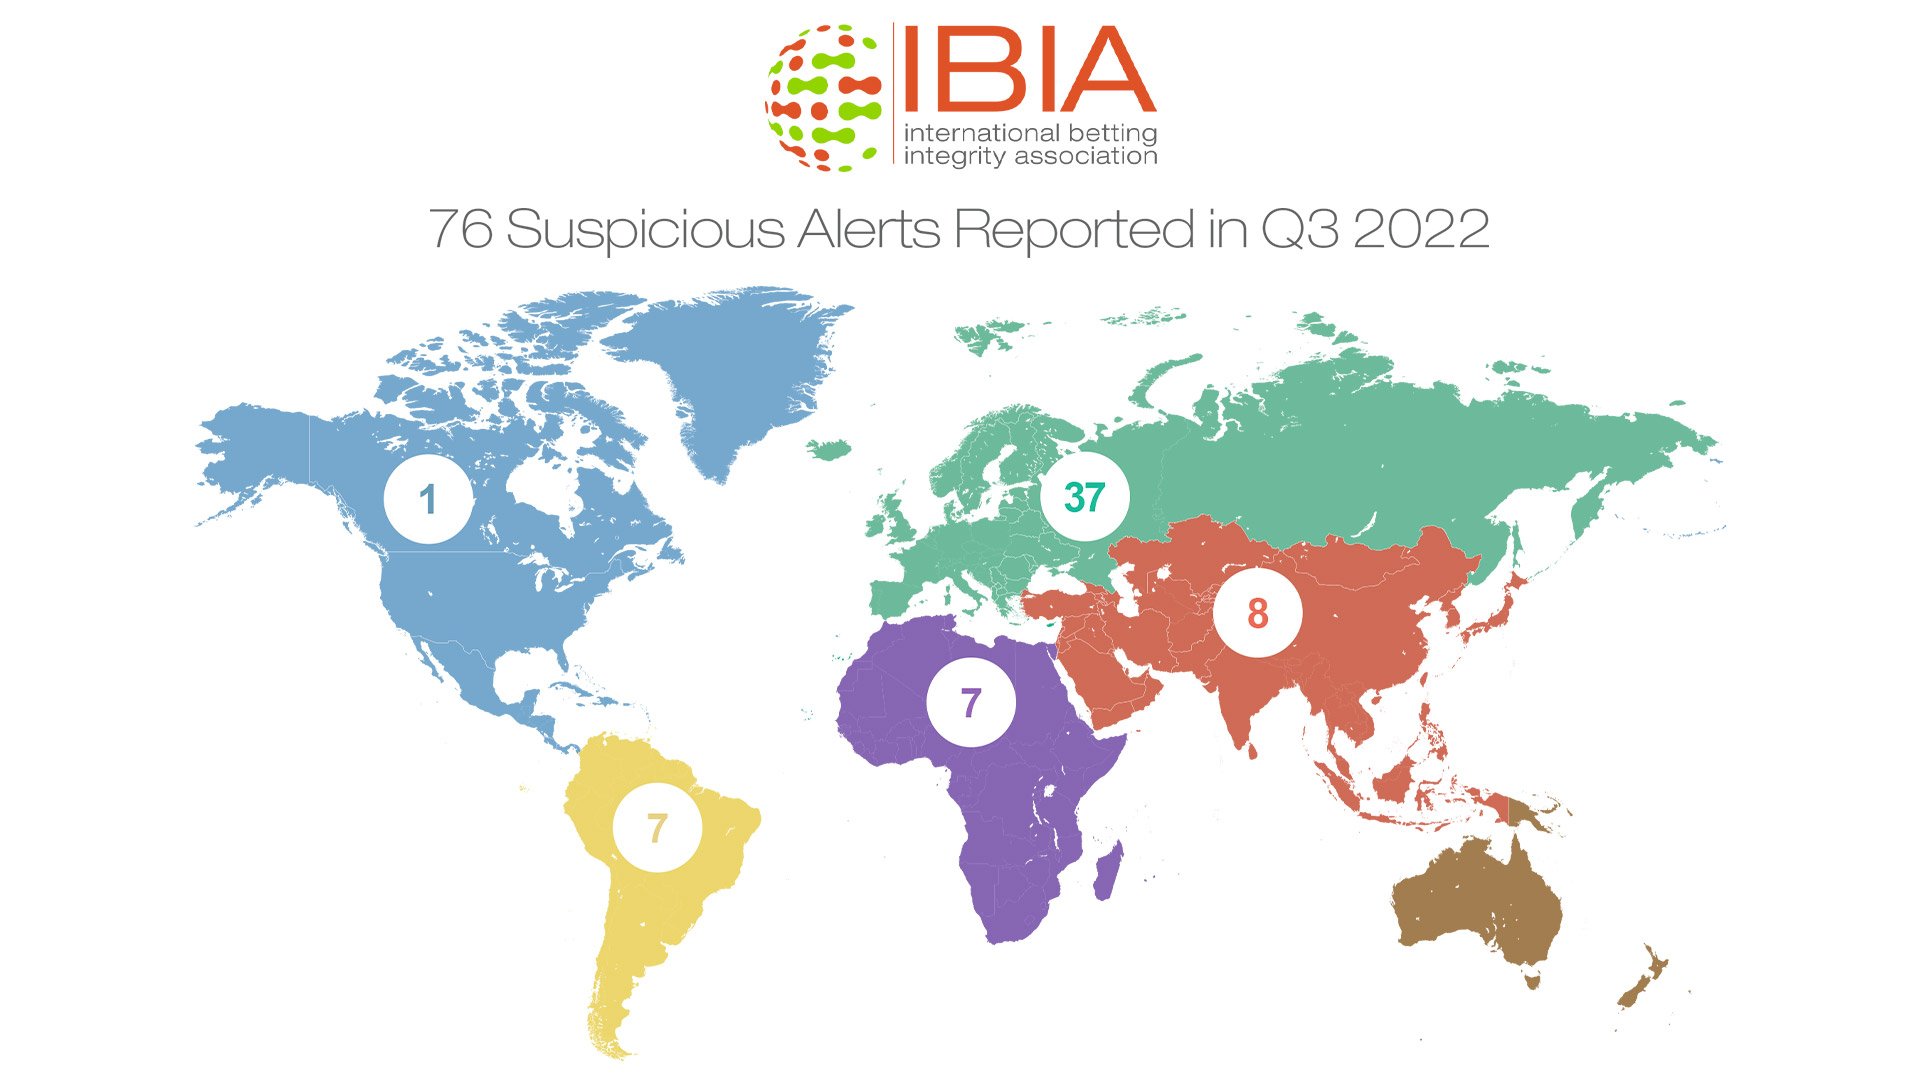 IBIA reports 76 cases of suspicious betting in Q3, down 15% from prior quarter